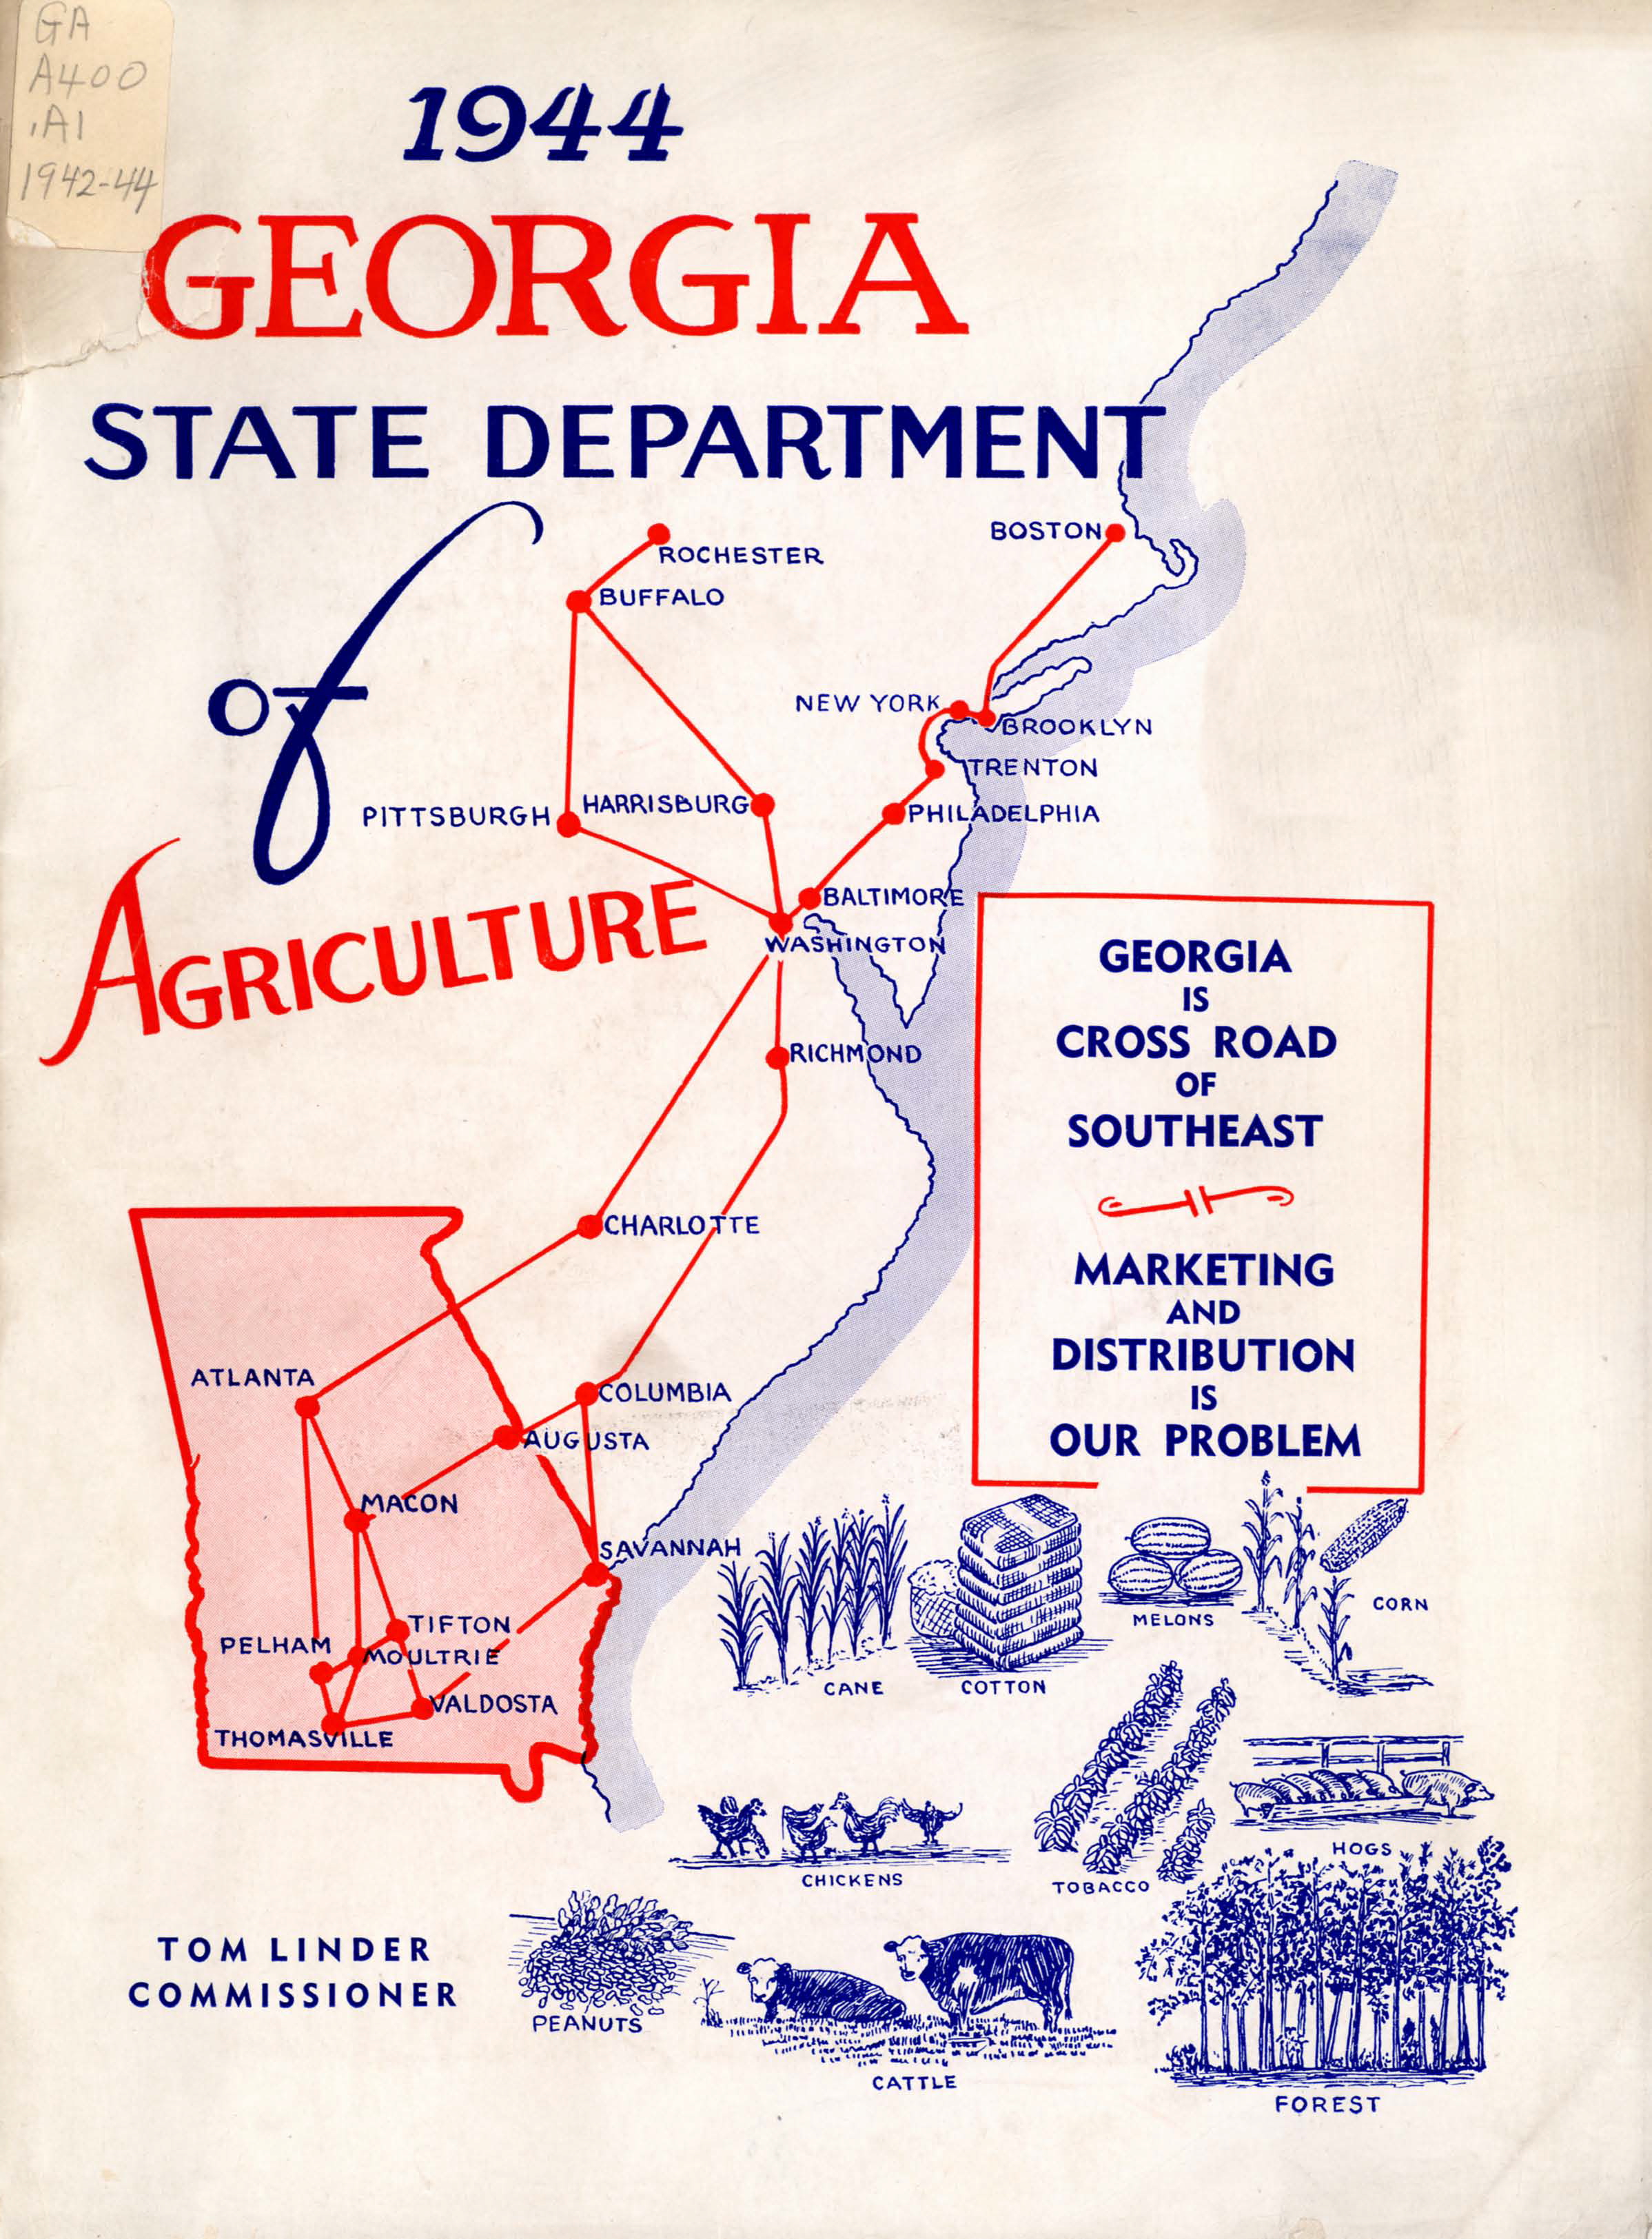 (1944) Cover of the 1944 ag report.